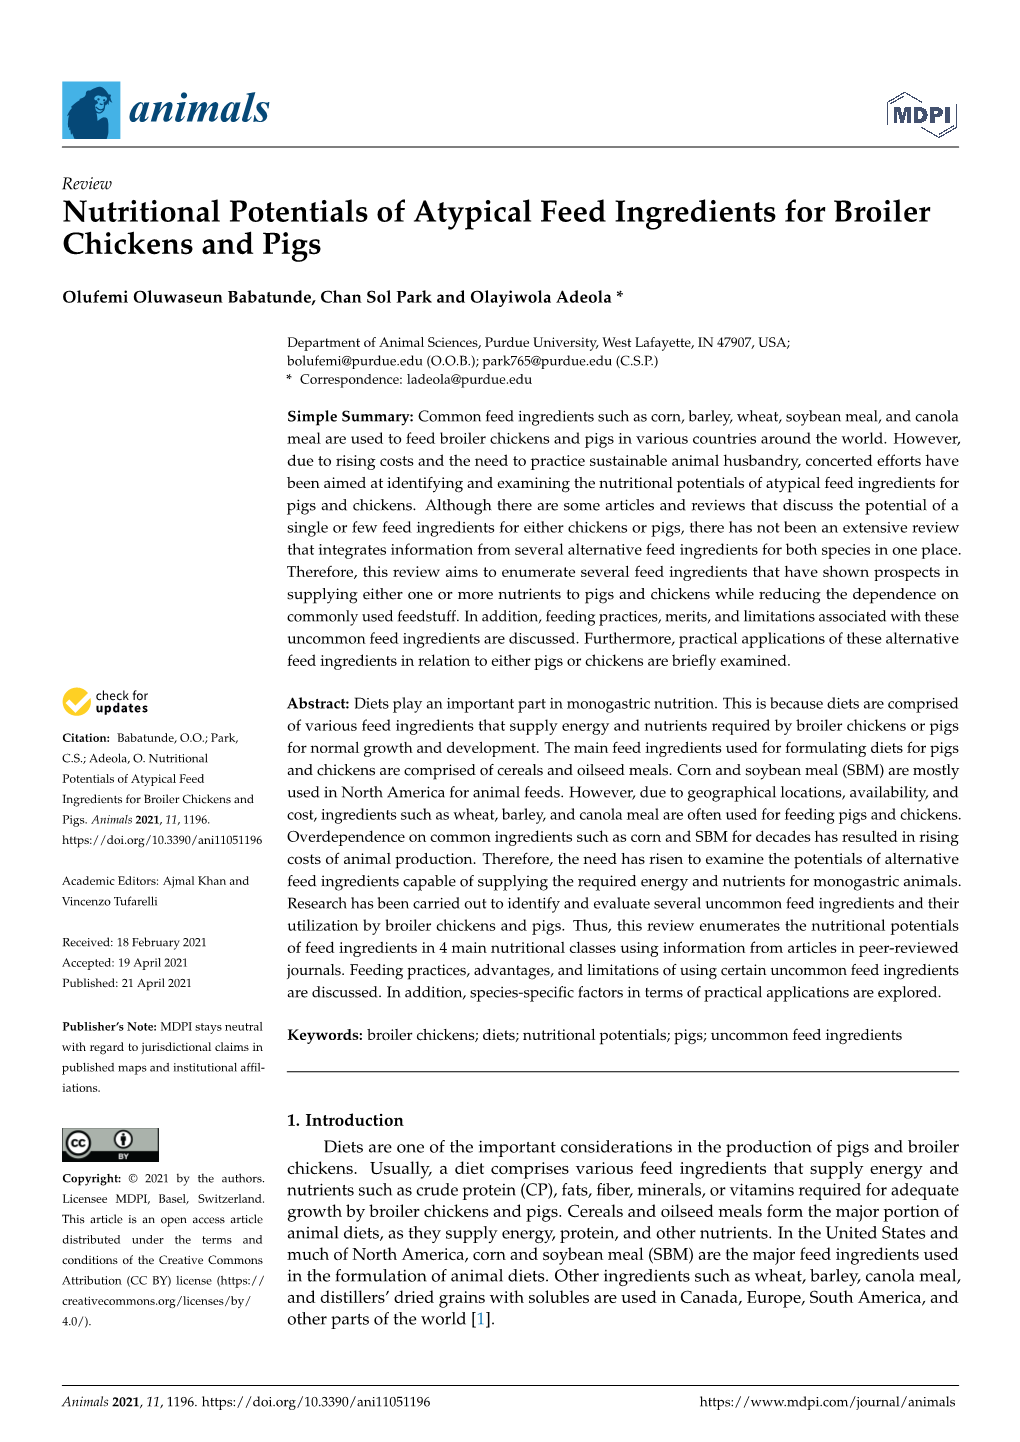 Nutritional Potentials of Atypical Feed Ingredients for Broiler Chickens and Pigs